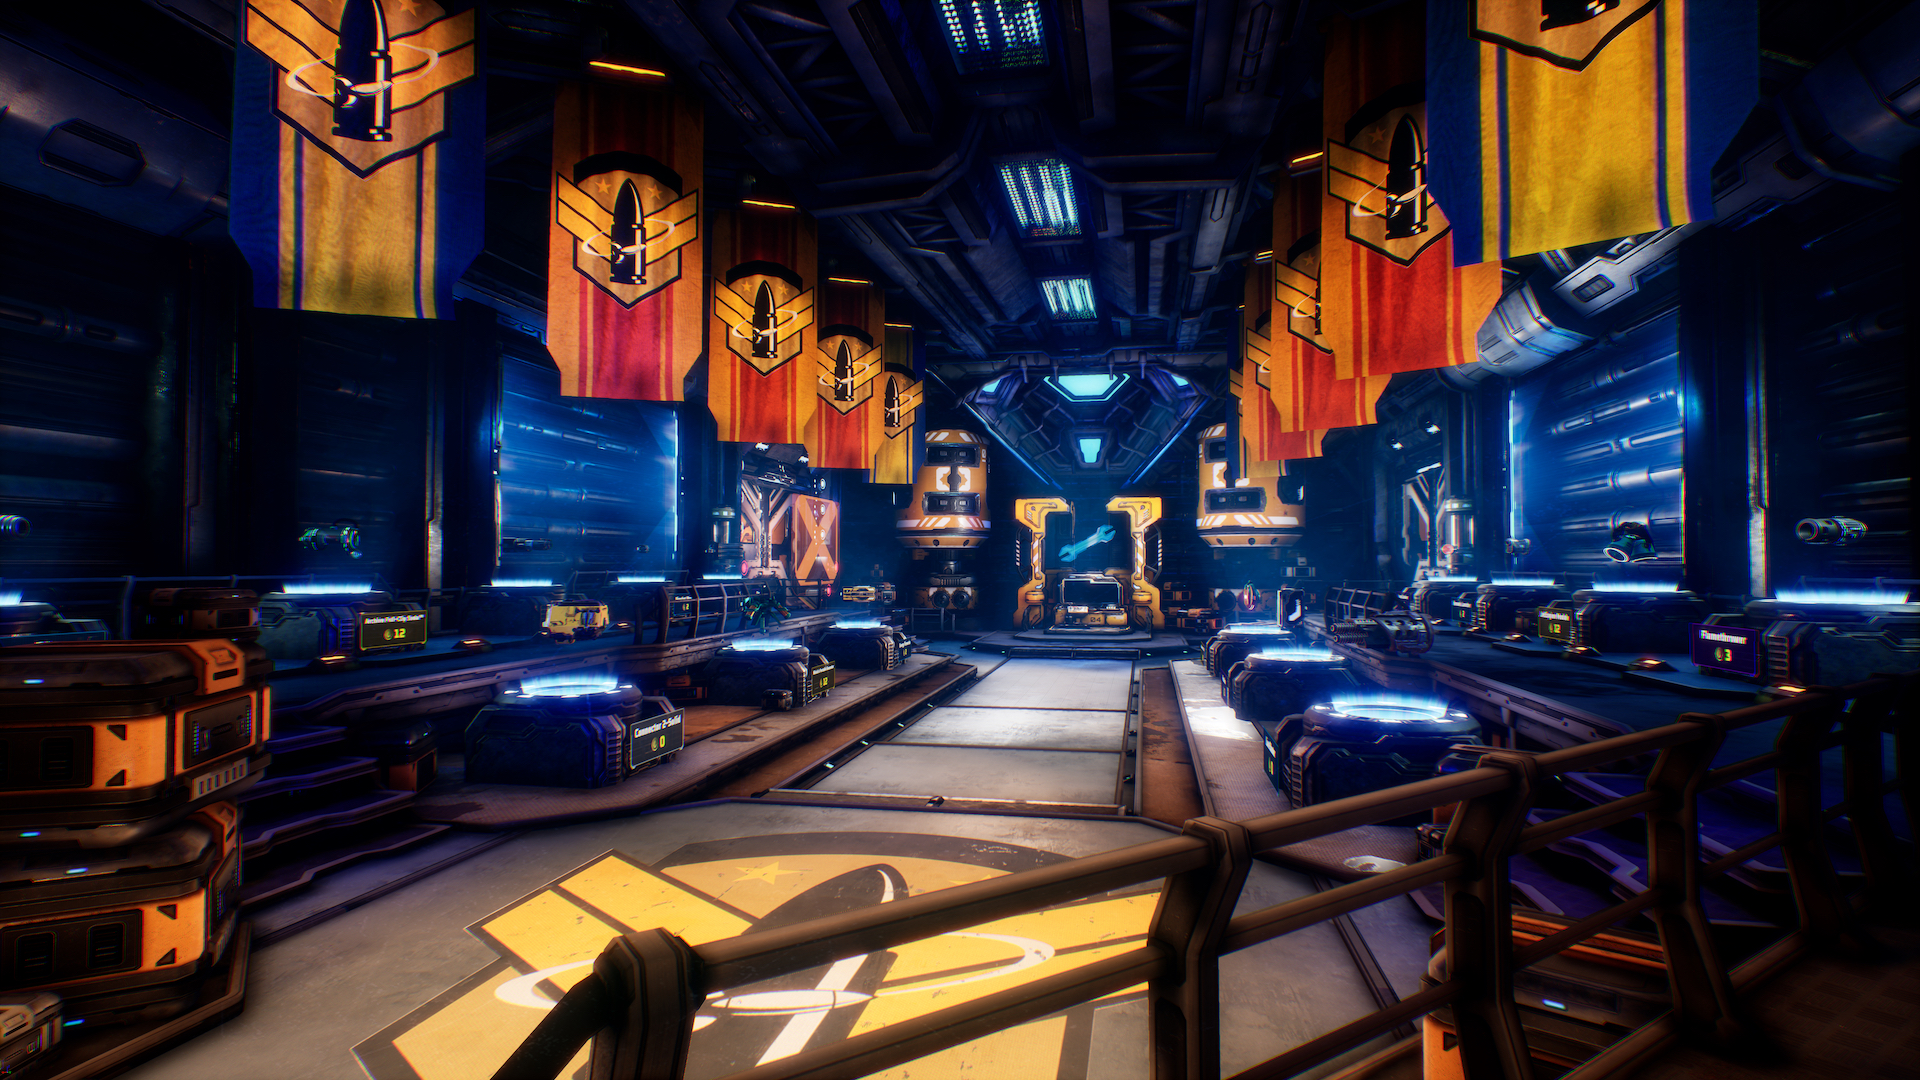 Mothergunship Demo Available Now on Xbox One – The Gun Crafting Range